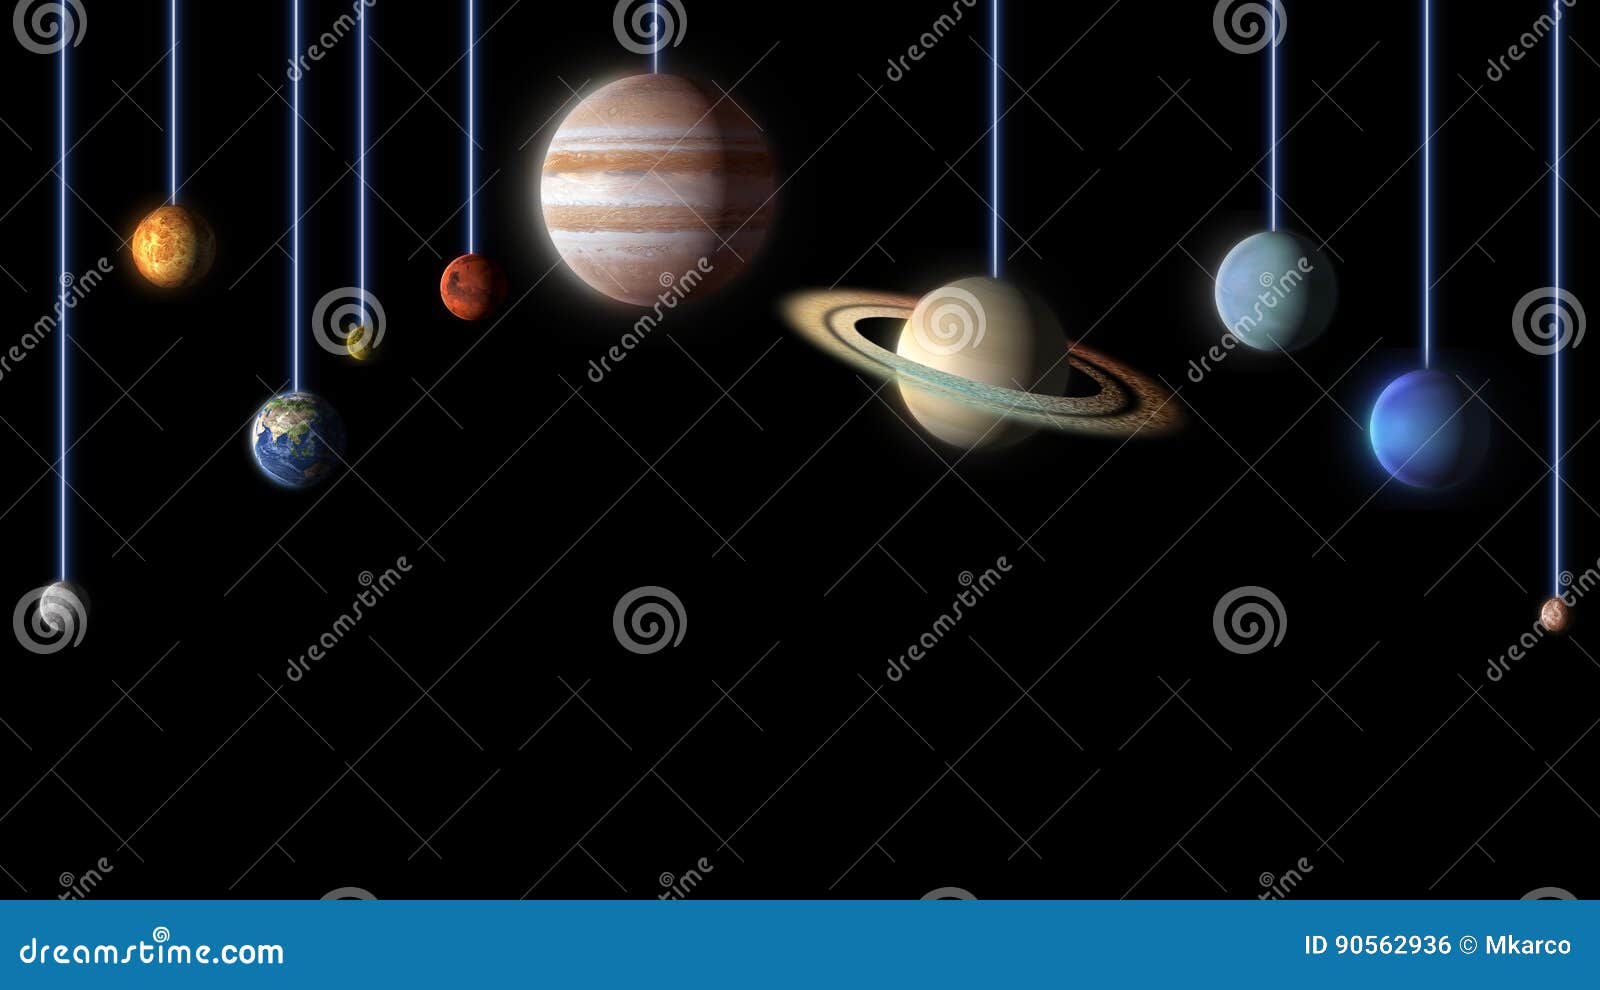 planets of the solar system abstract background, 